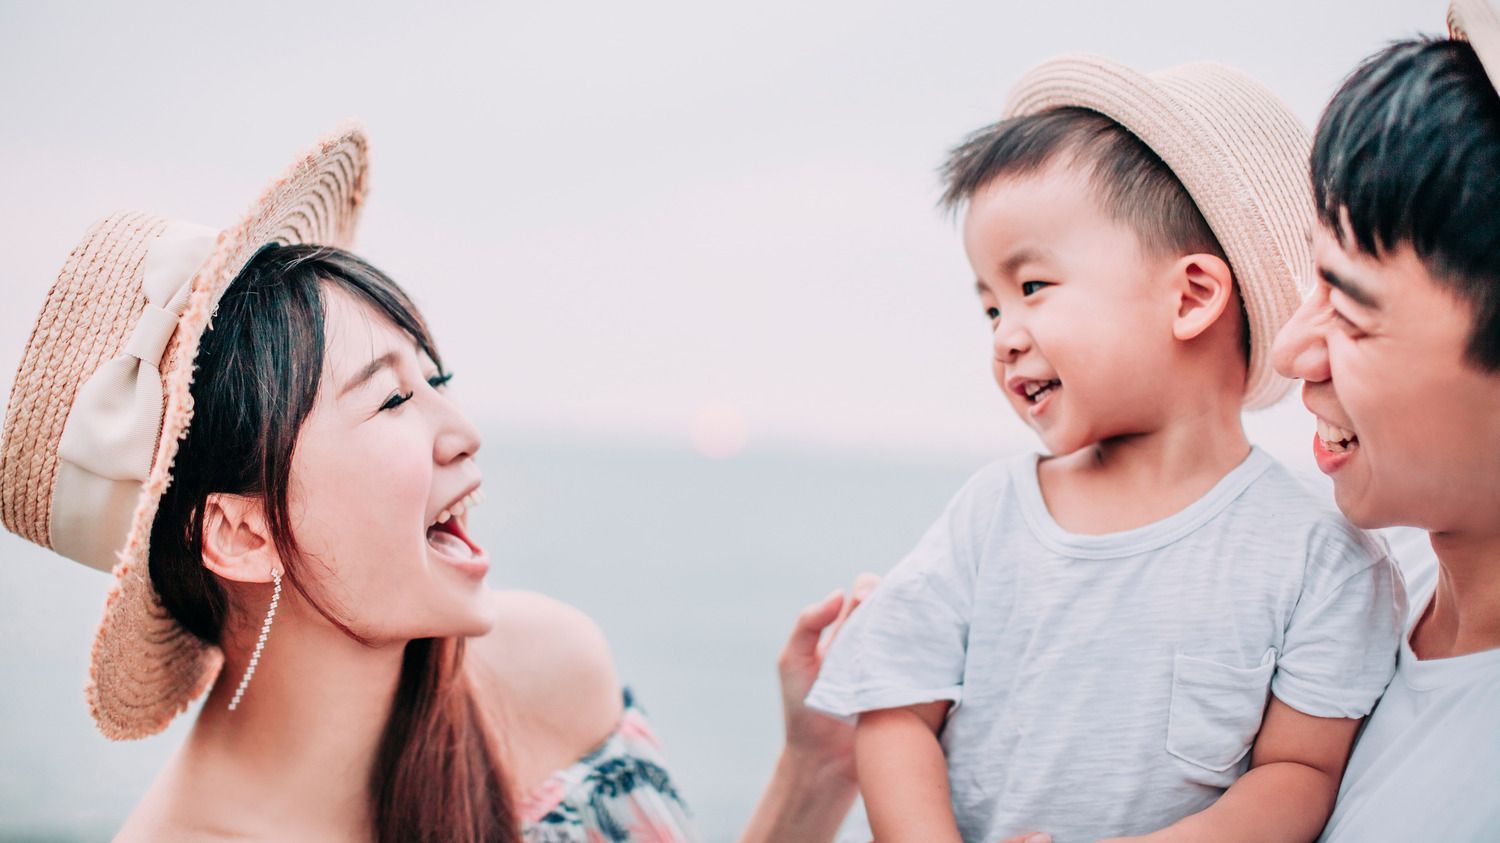 7 Tips for Parenting with an Open Mind